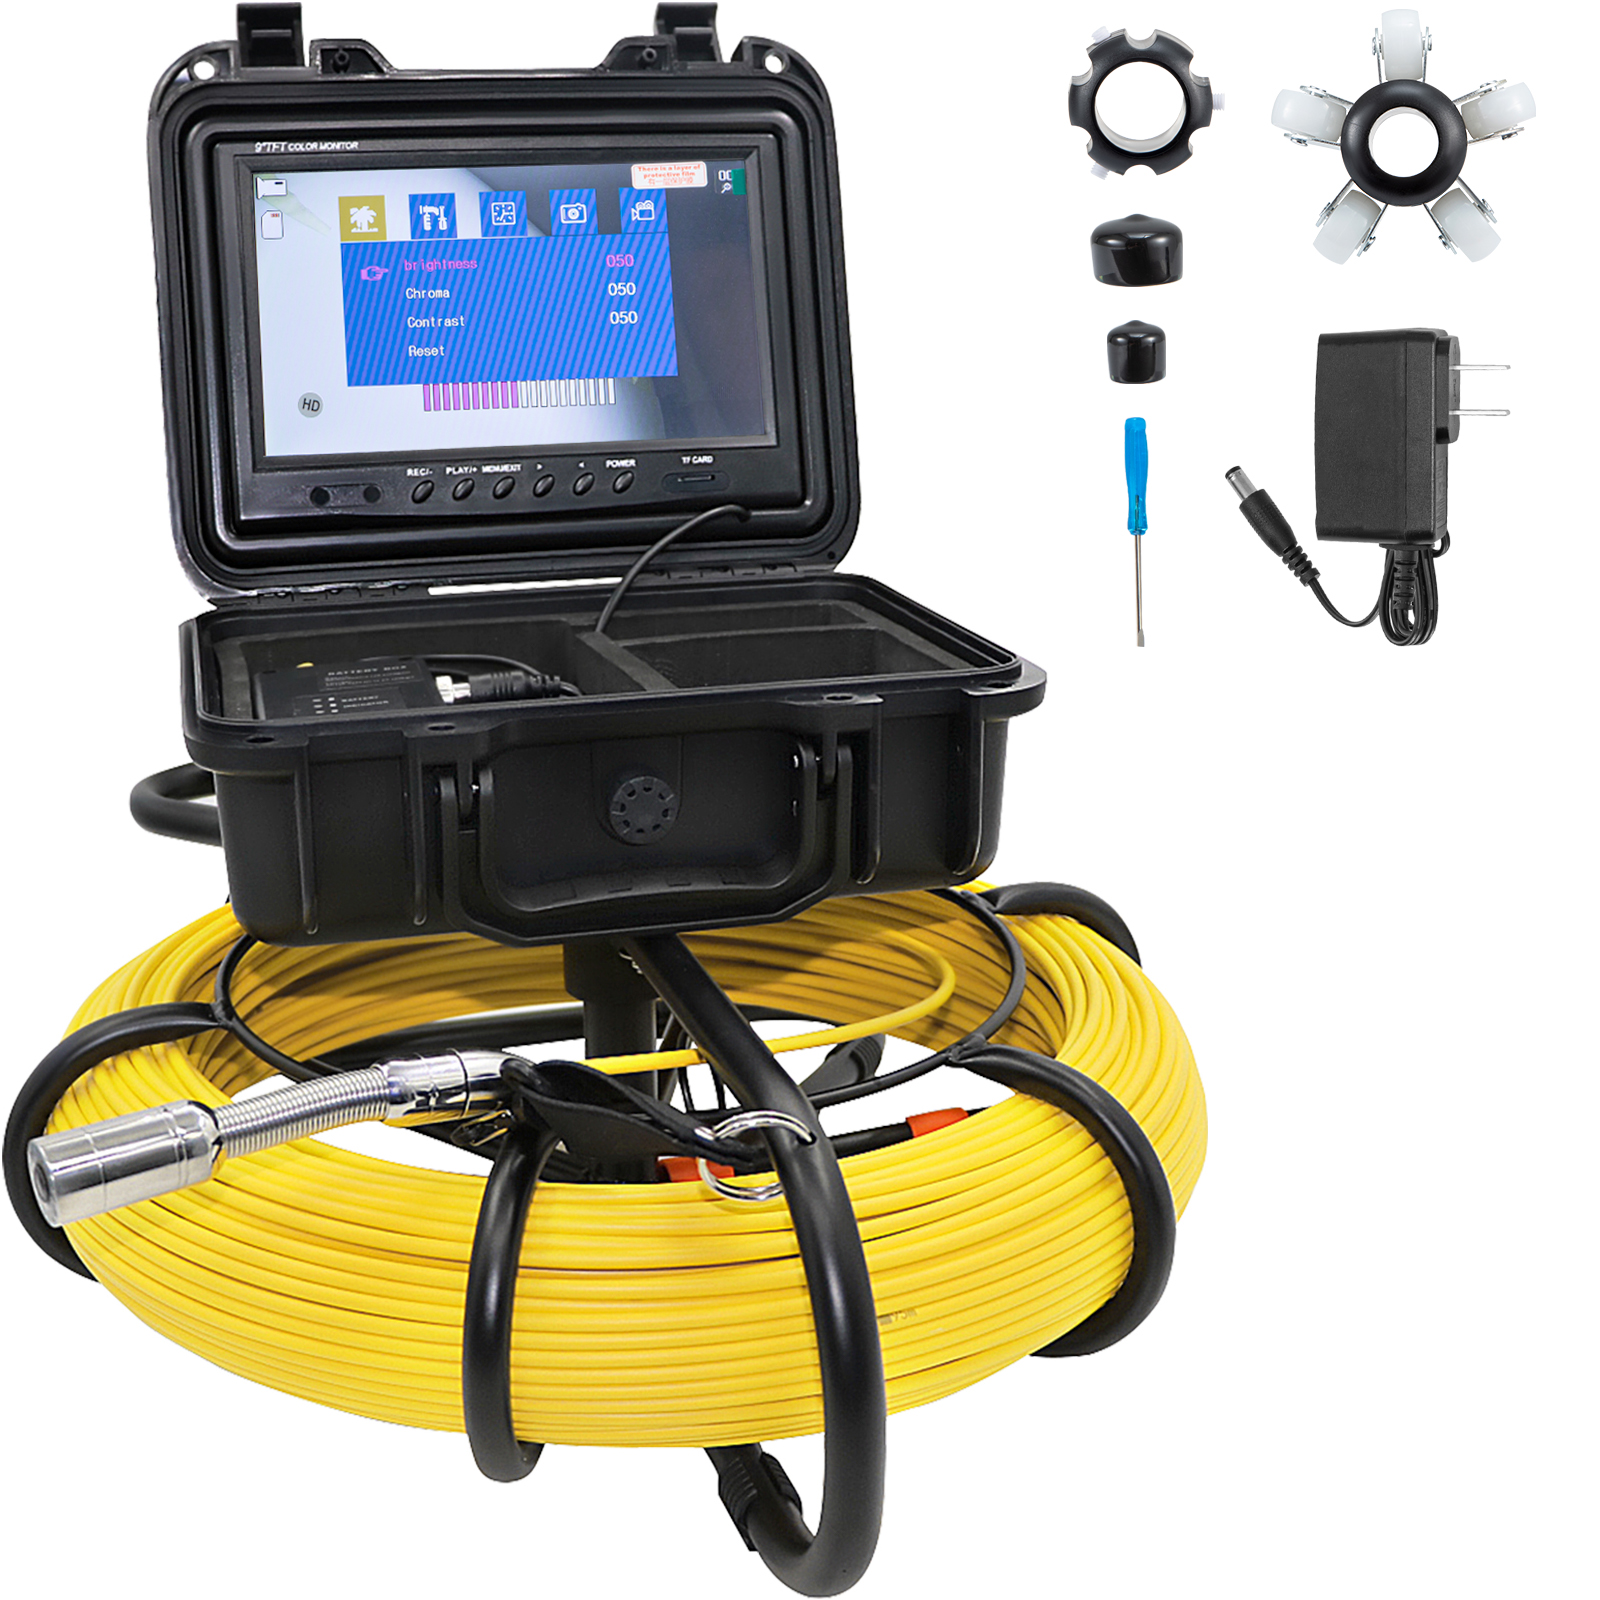 20M/30M/40M/50M Pipe Inspection Camera IP68 Drain Sewer Pipeline Industrial  Endoscope With DVR Recording Function 9 Monitor - AliExpress